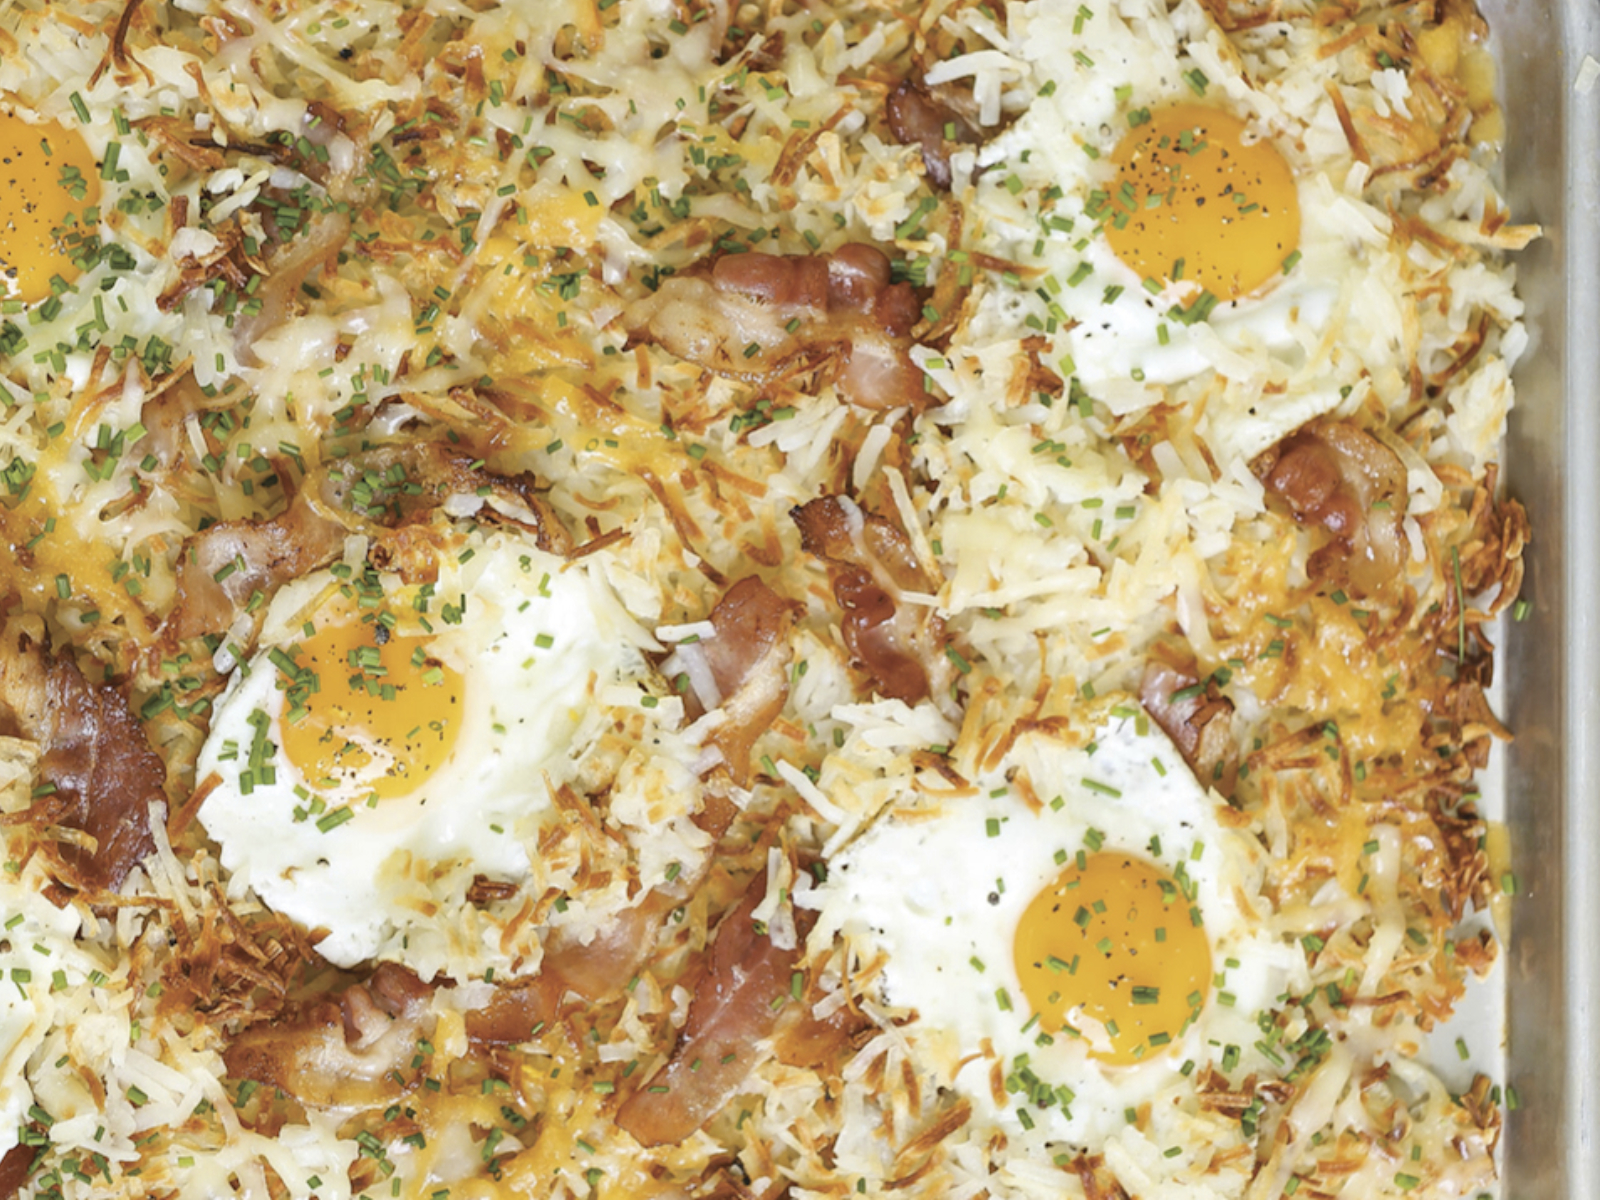 Sheet Pan Breakfast Bake with Eggs, Bacon, and Hashbrowns